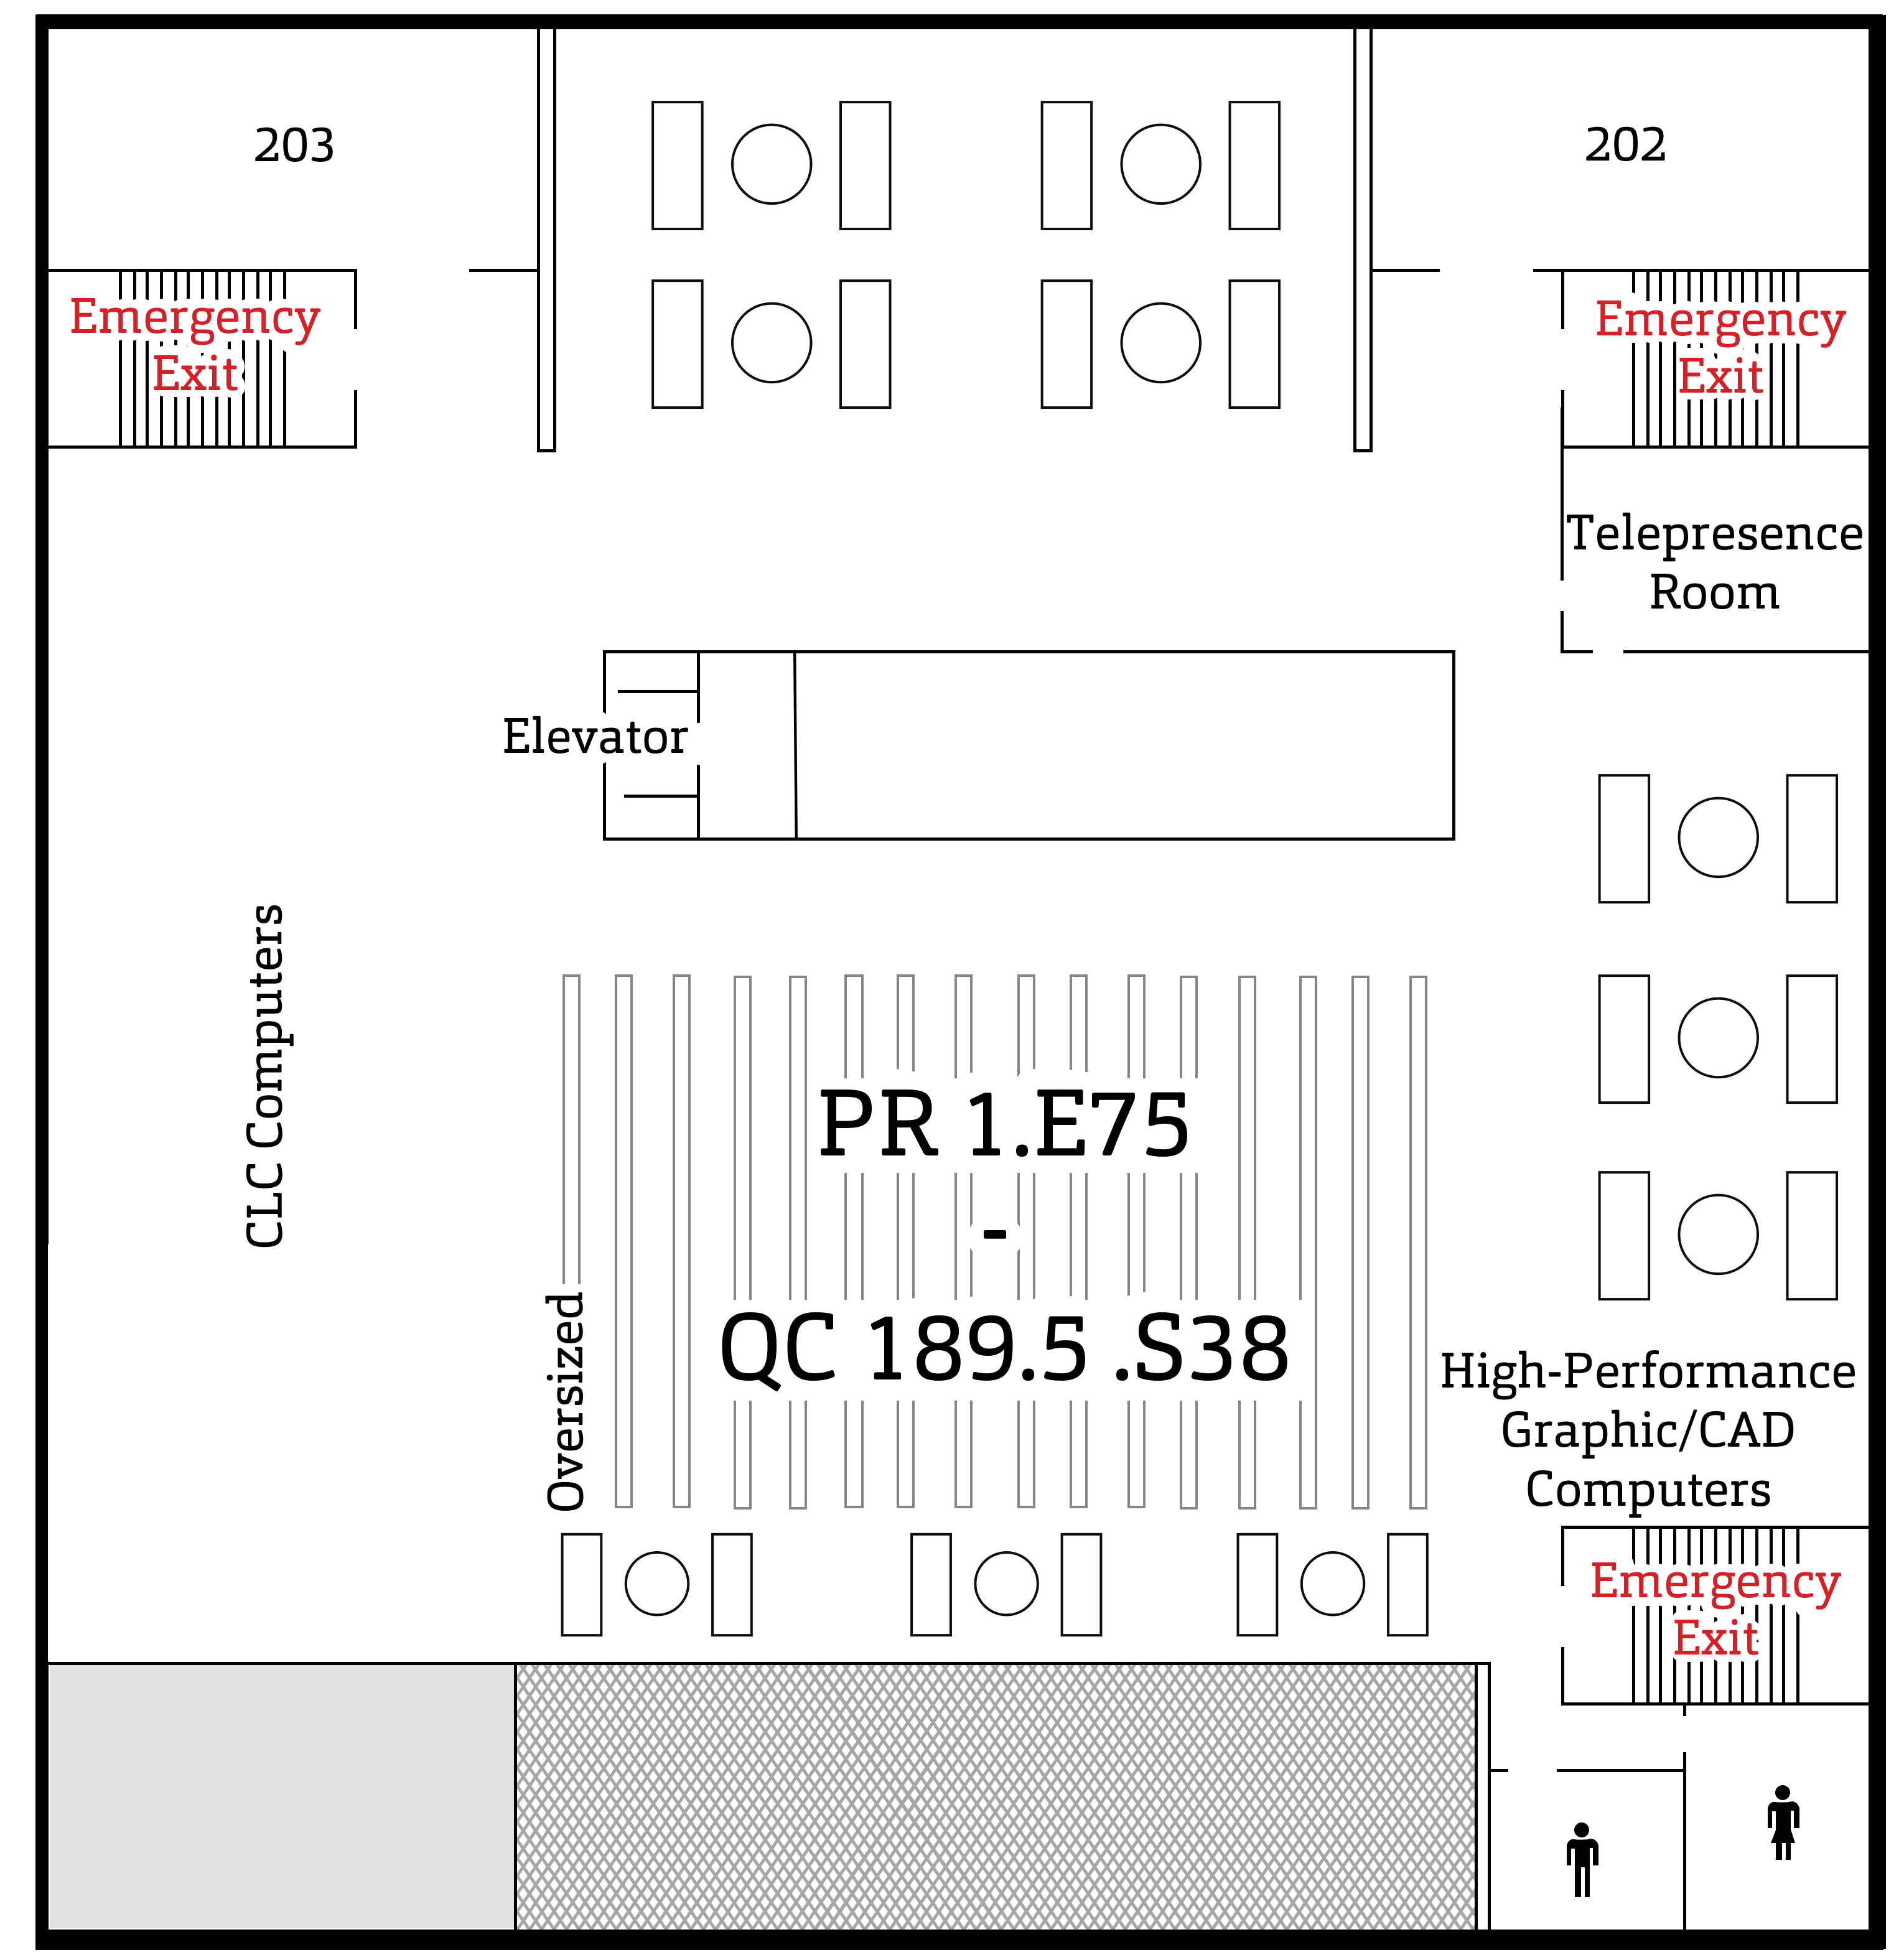 Map of 2nd floor of Library